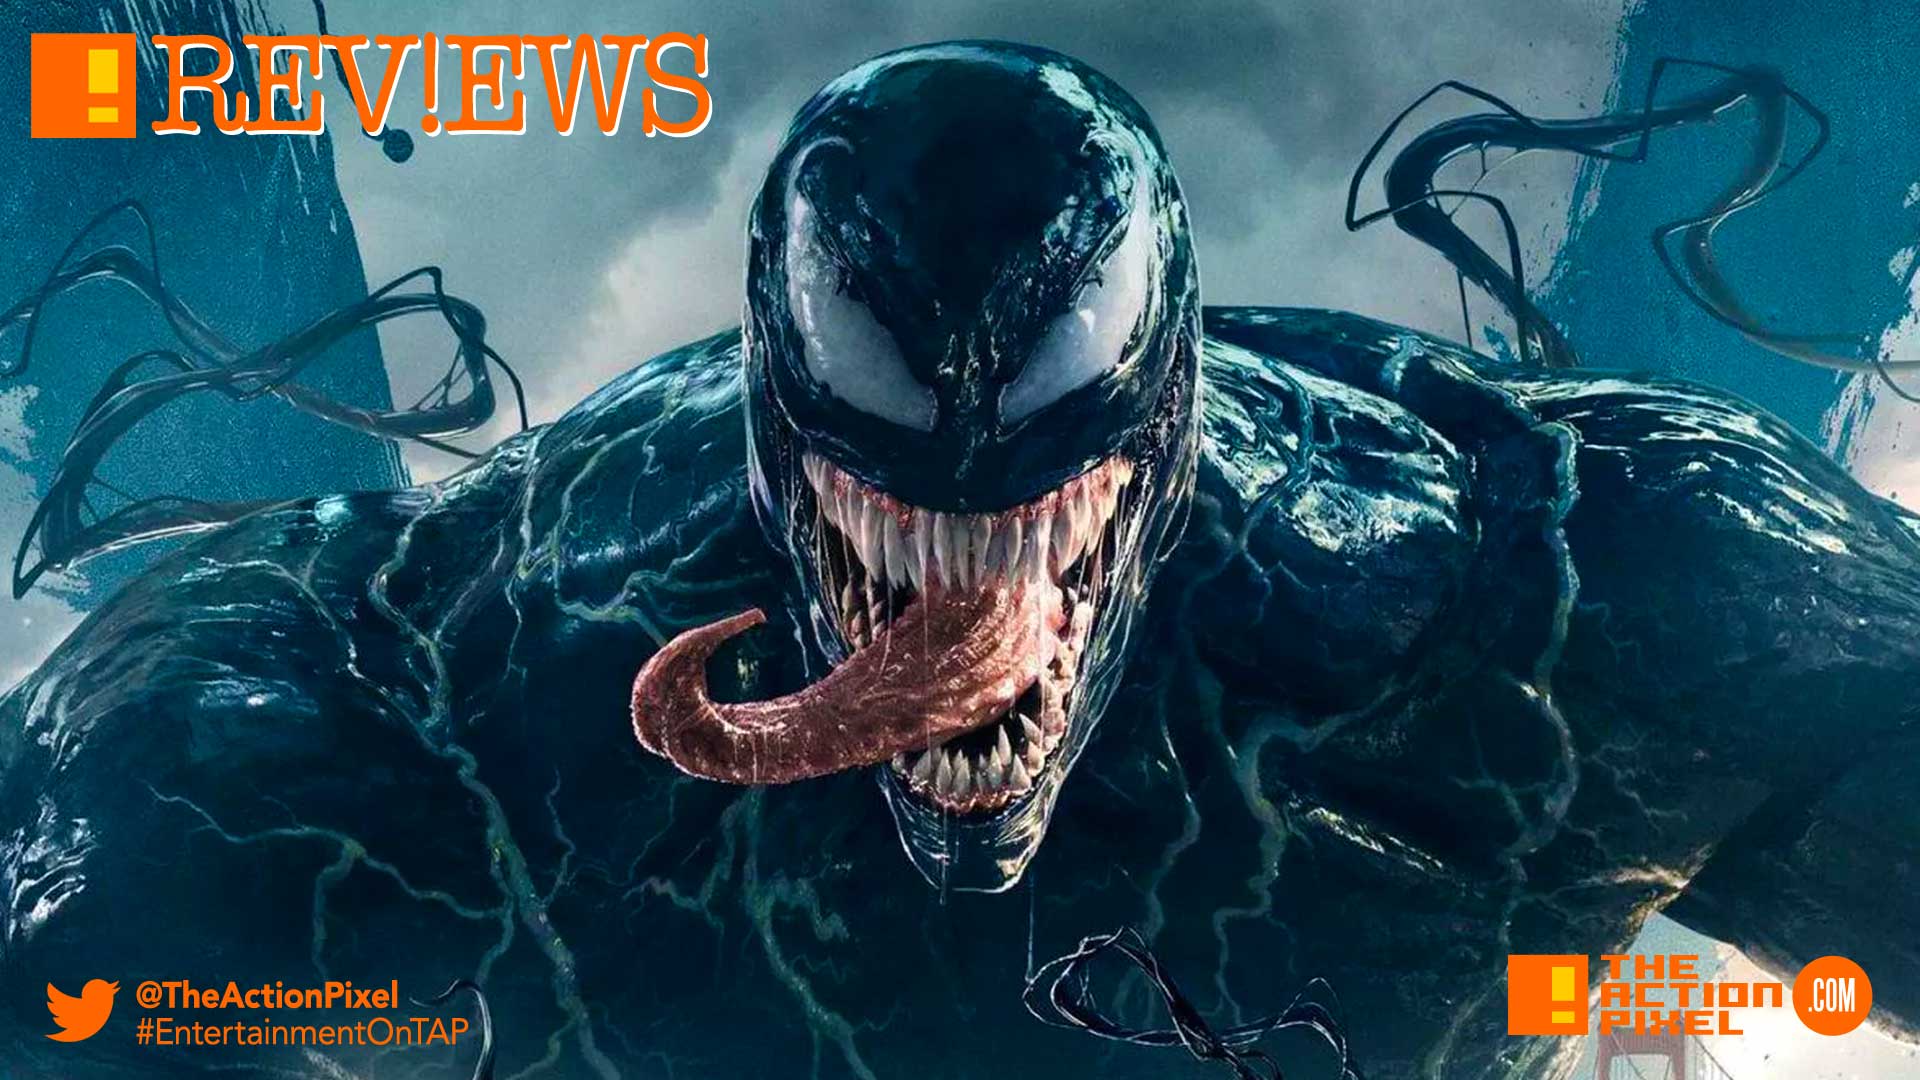 venom, tom hardy,poster, trailer, tom hardy, venom, spider-man, spin-off, the action pixel, entertainment on tap,sony pictures,official trailer, entertainment weekly, trailer 2,film review, venom film review,